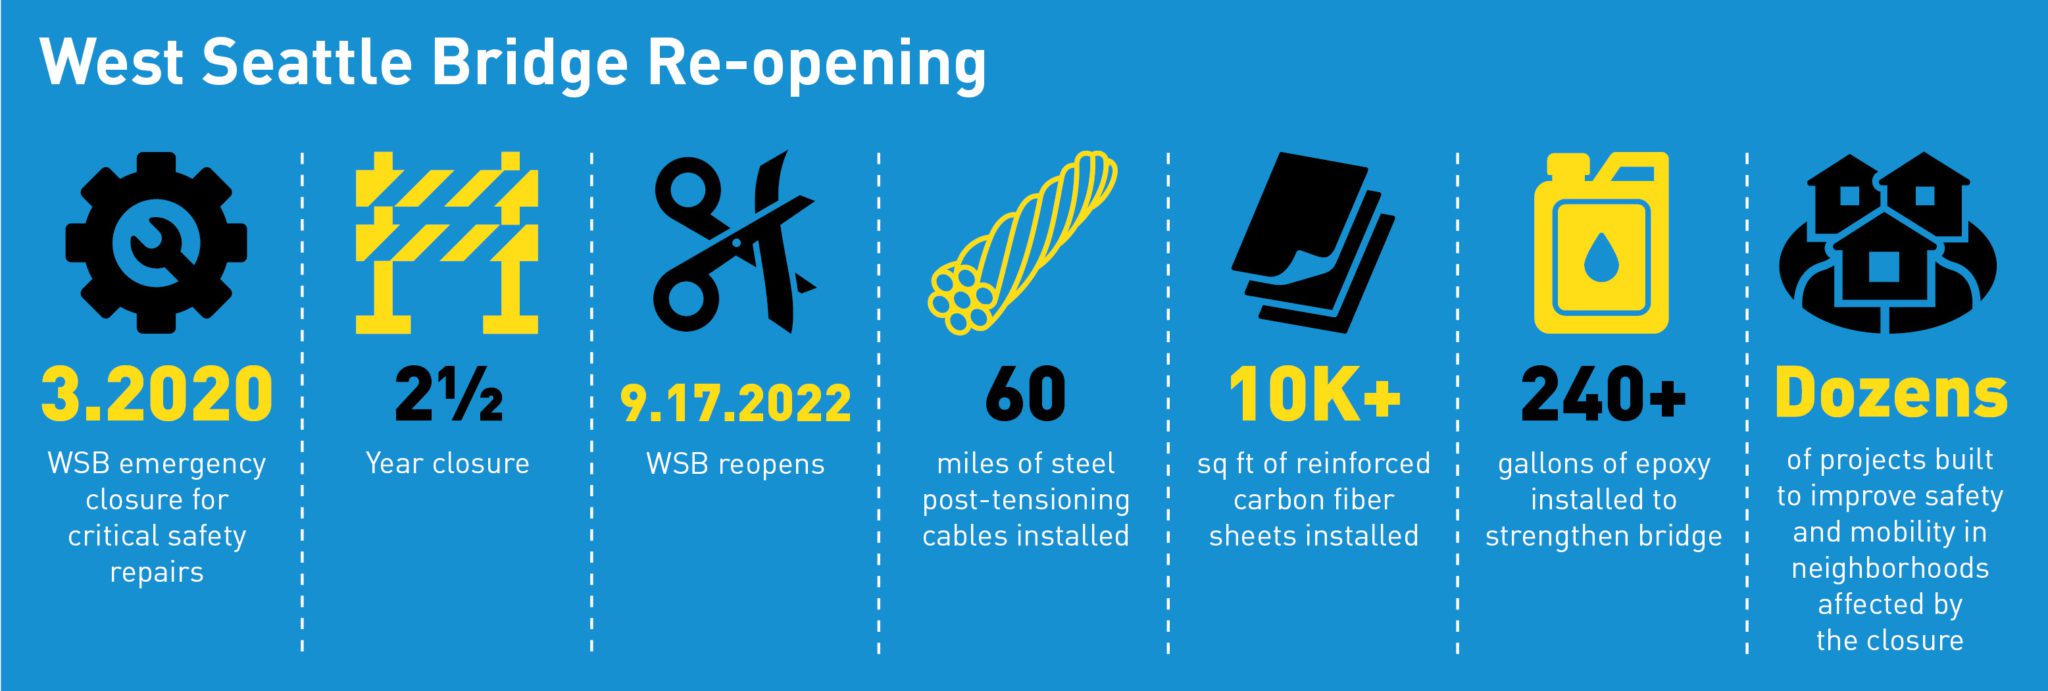 Infographic regarding the West Seattle Bridge Re-Opening. The graphic includes a number of statistics, including the date when the bridge closed in March 2020, that the closure was 2 1/2 years long, the date of reopening on September 17, 2022, that 60 miles of steel post-tensioning cables were installed, 10,000 sq feet of carbon fiber sheets were installed, 240 gallons of epoxy were installed to strengthen the bridge, and dozes of projects were built to improve safety and mobility in neighborhoods affected by the closure.